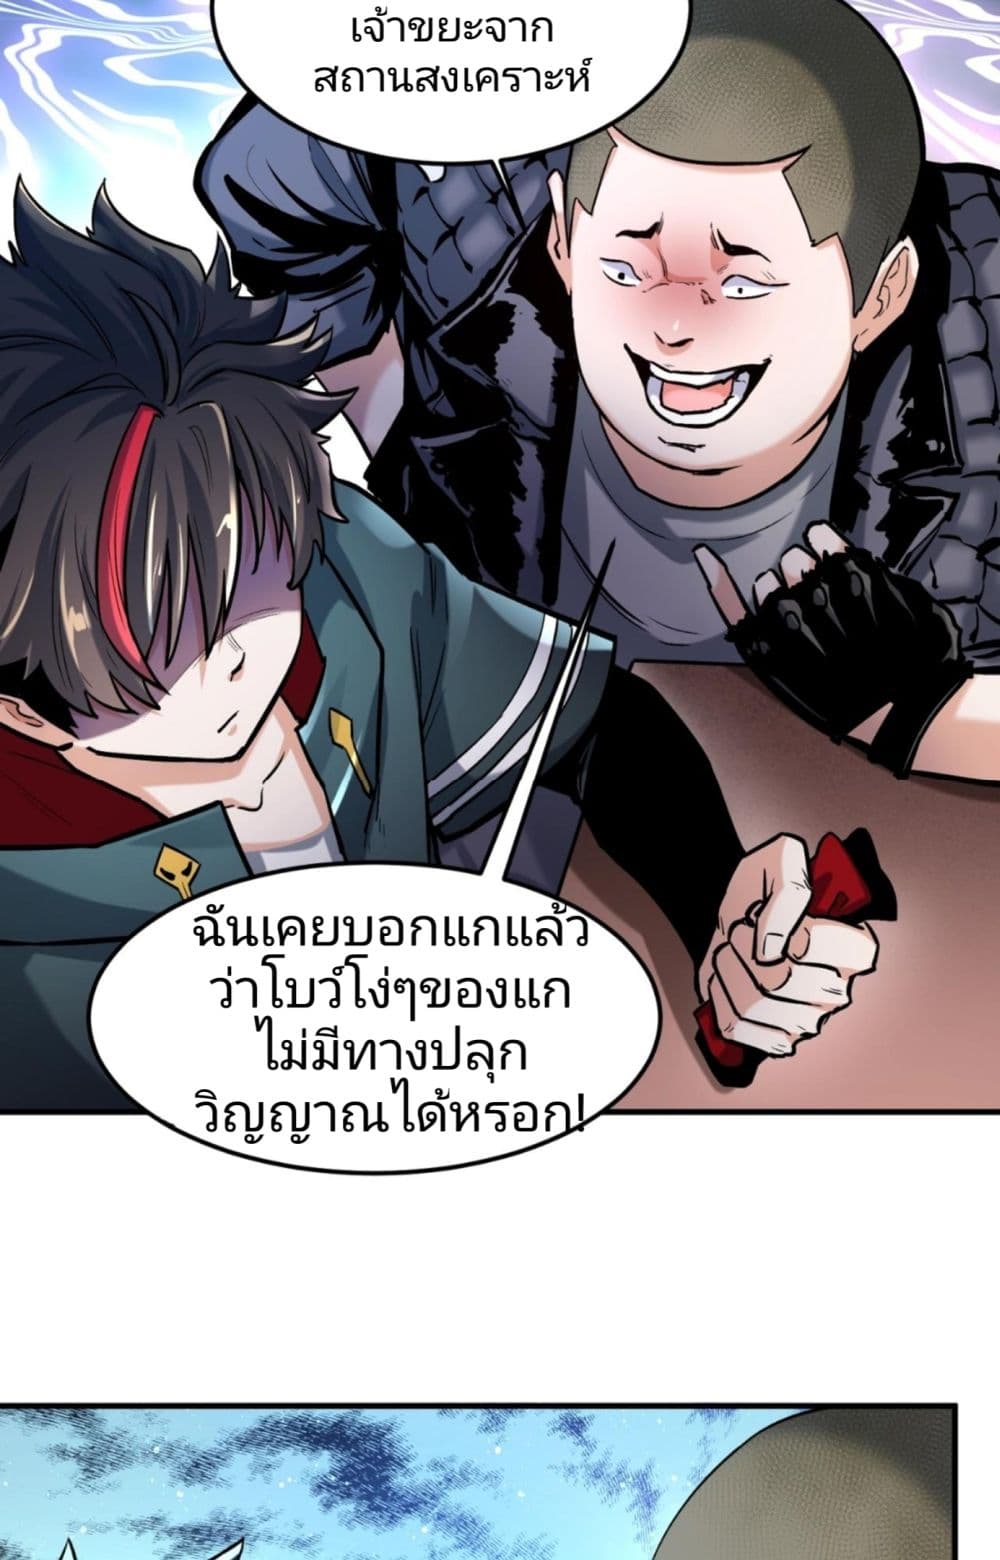 The Age of Ghost Spirits à¸à¸­à¸à¸à¸µà¹ 1 (31)